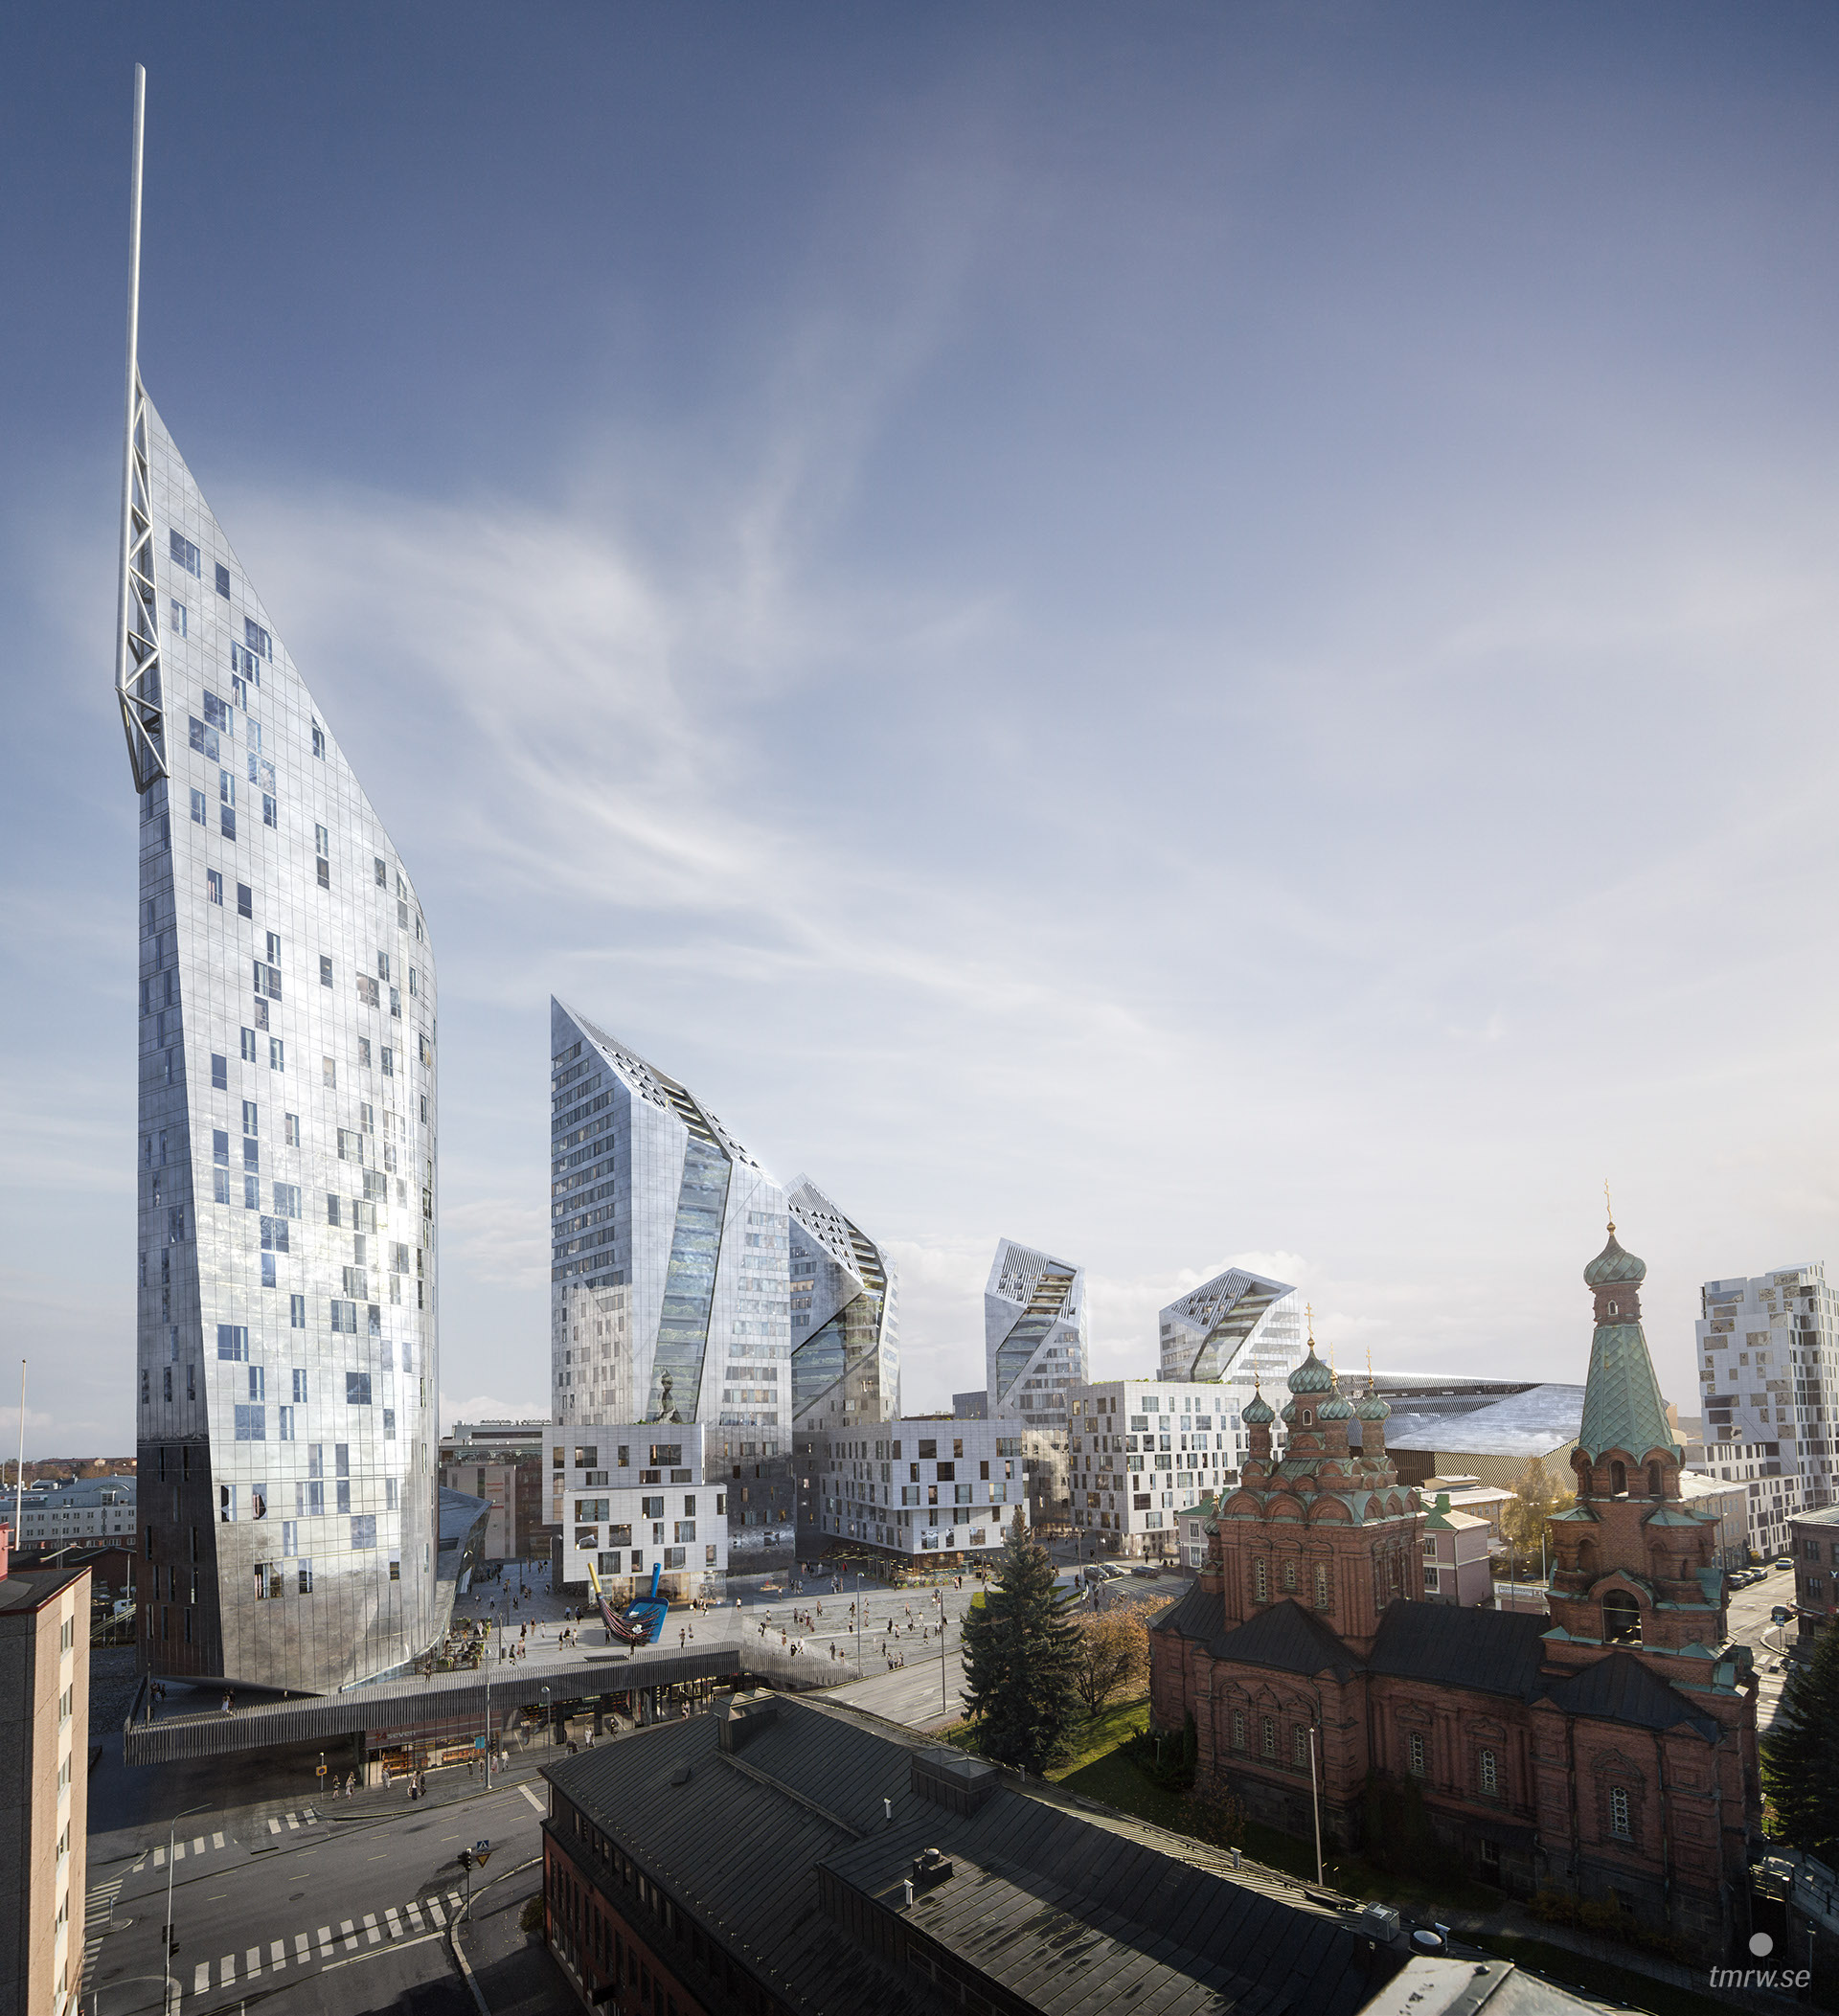 Architectural visualization of Tampere for Libeskind. A image of several buildings from semi aerial view in daylight.